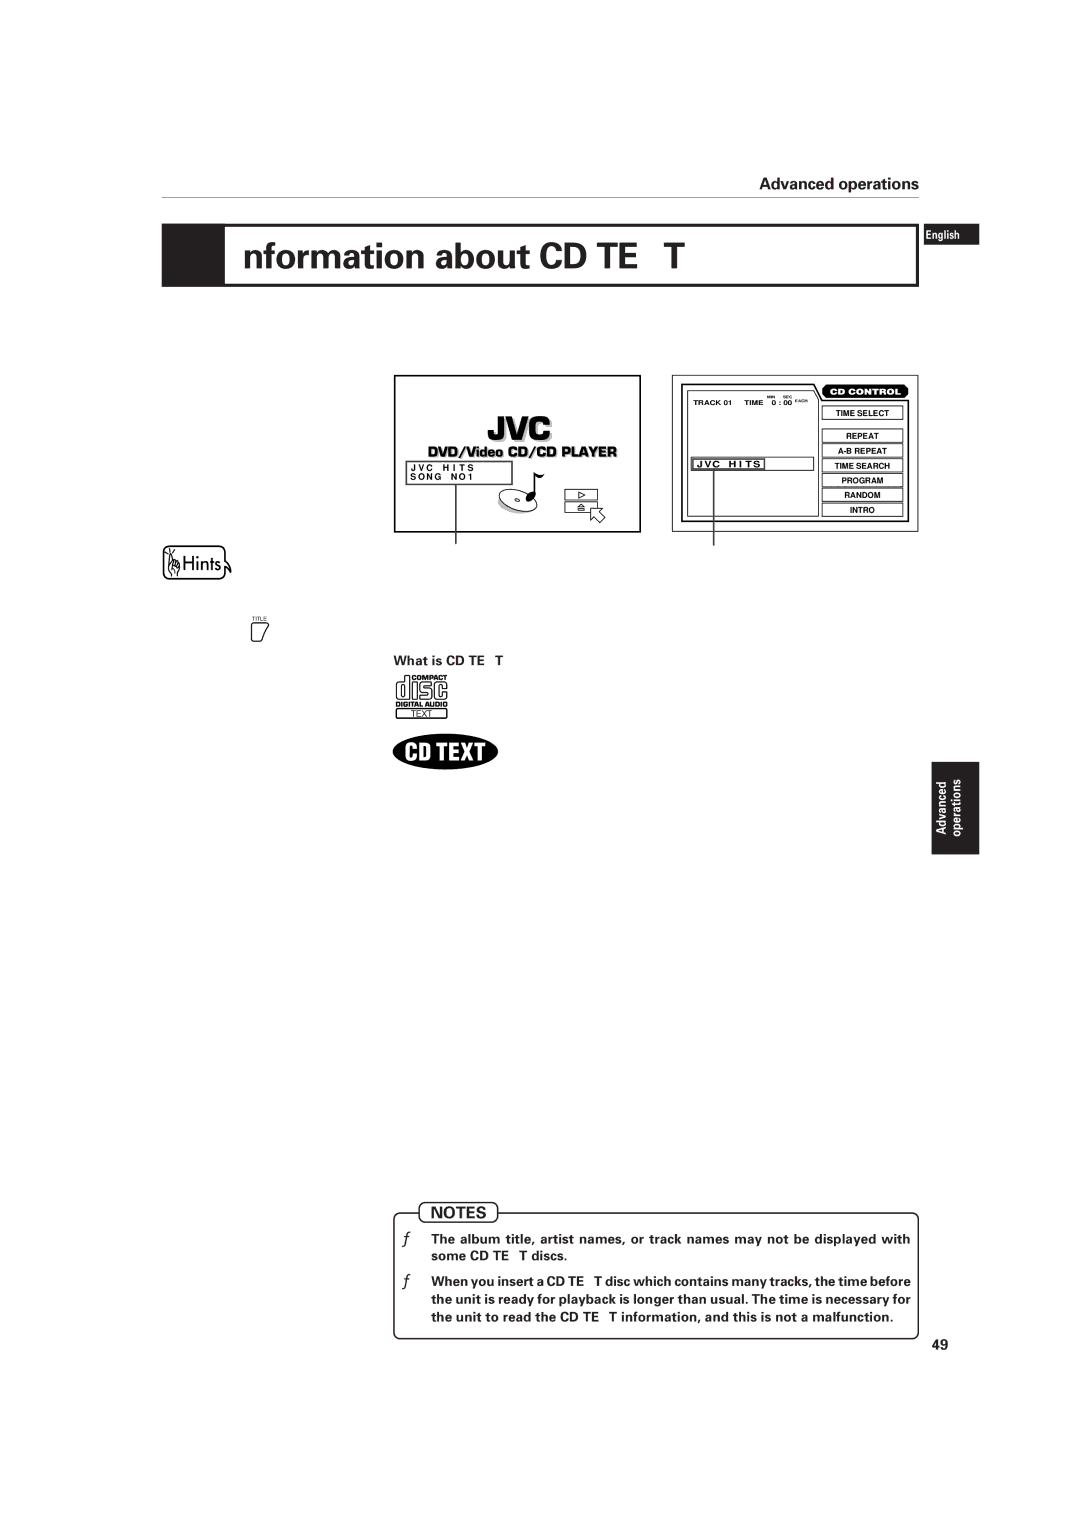 JVC XV-D701BK manual Information about CD Text, What is CD TEXT? 